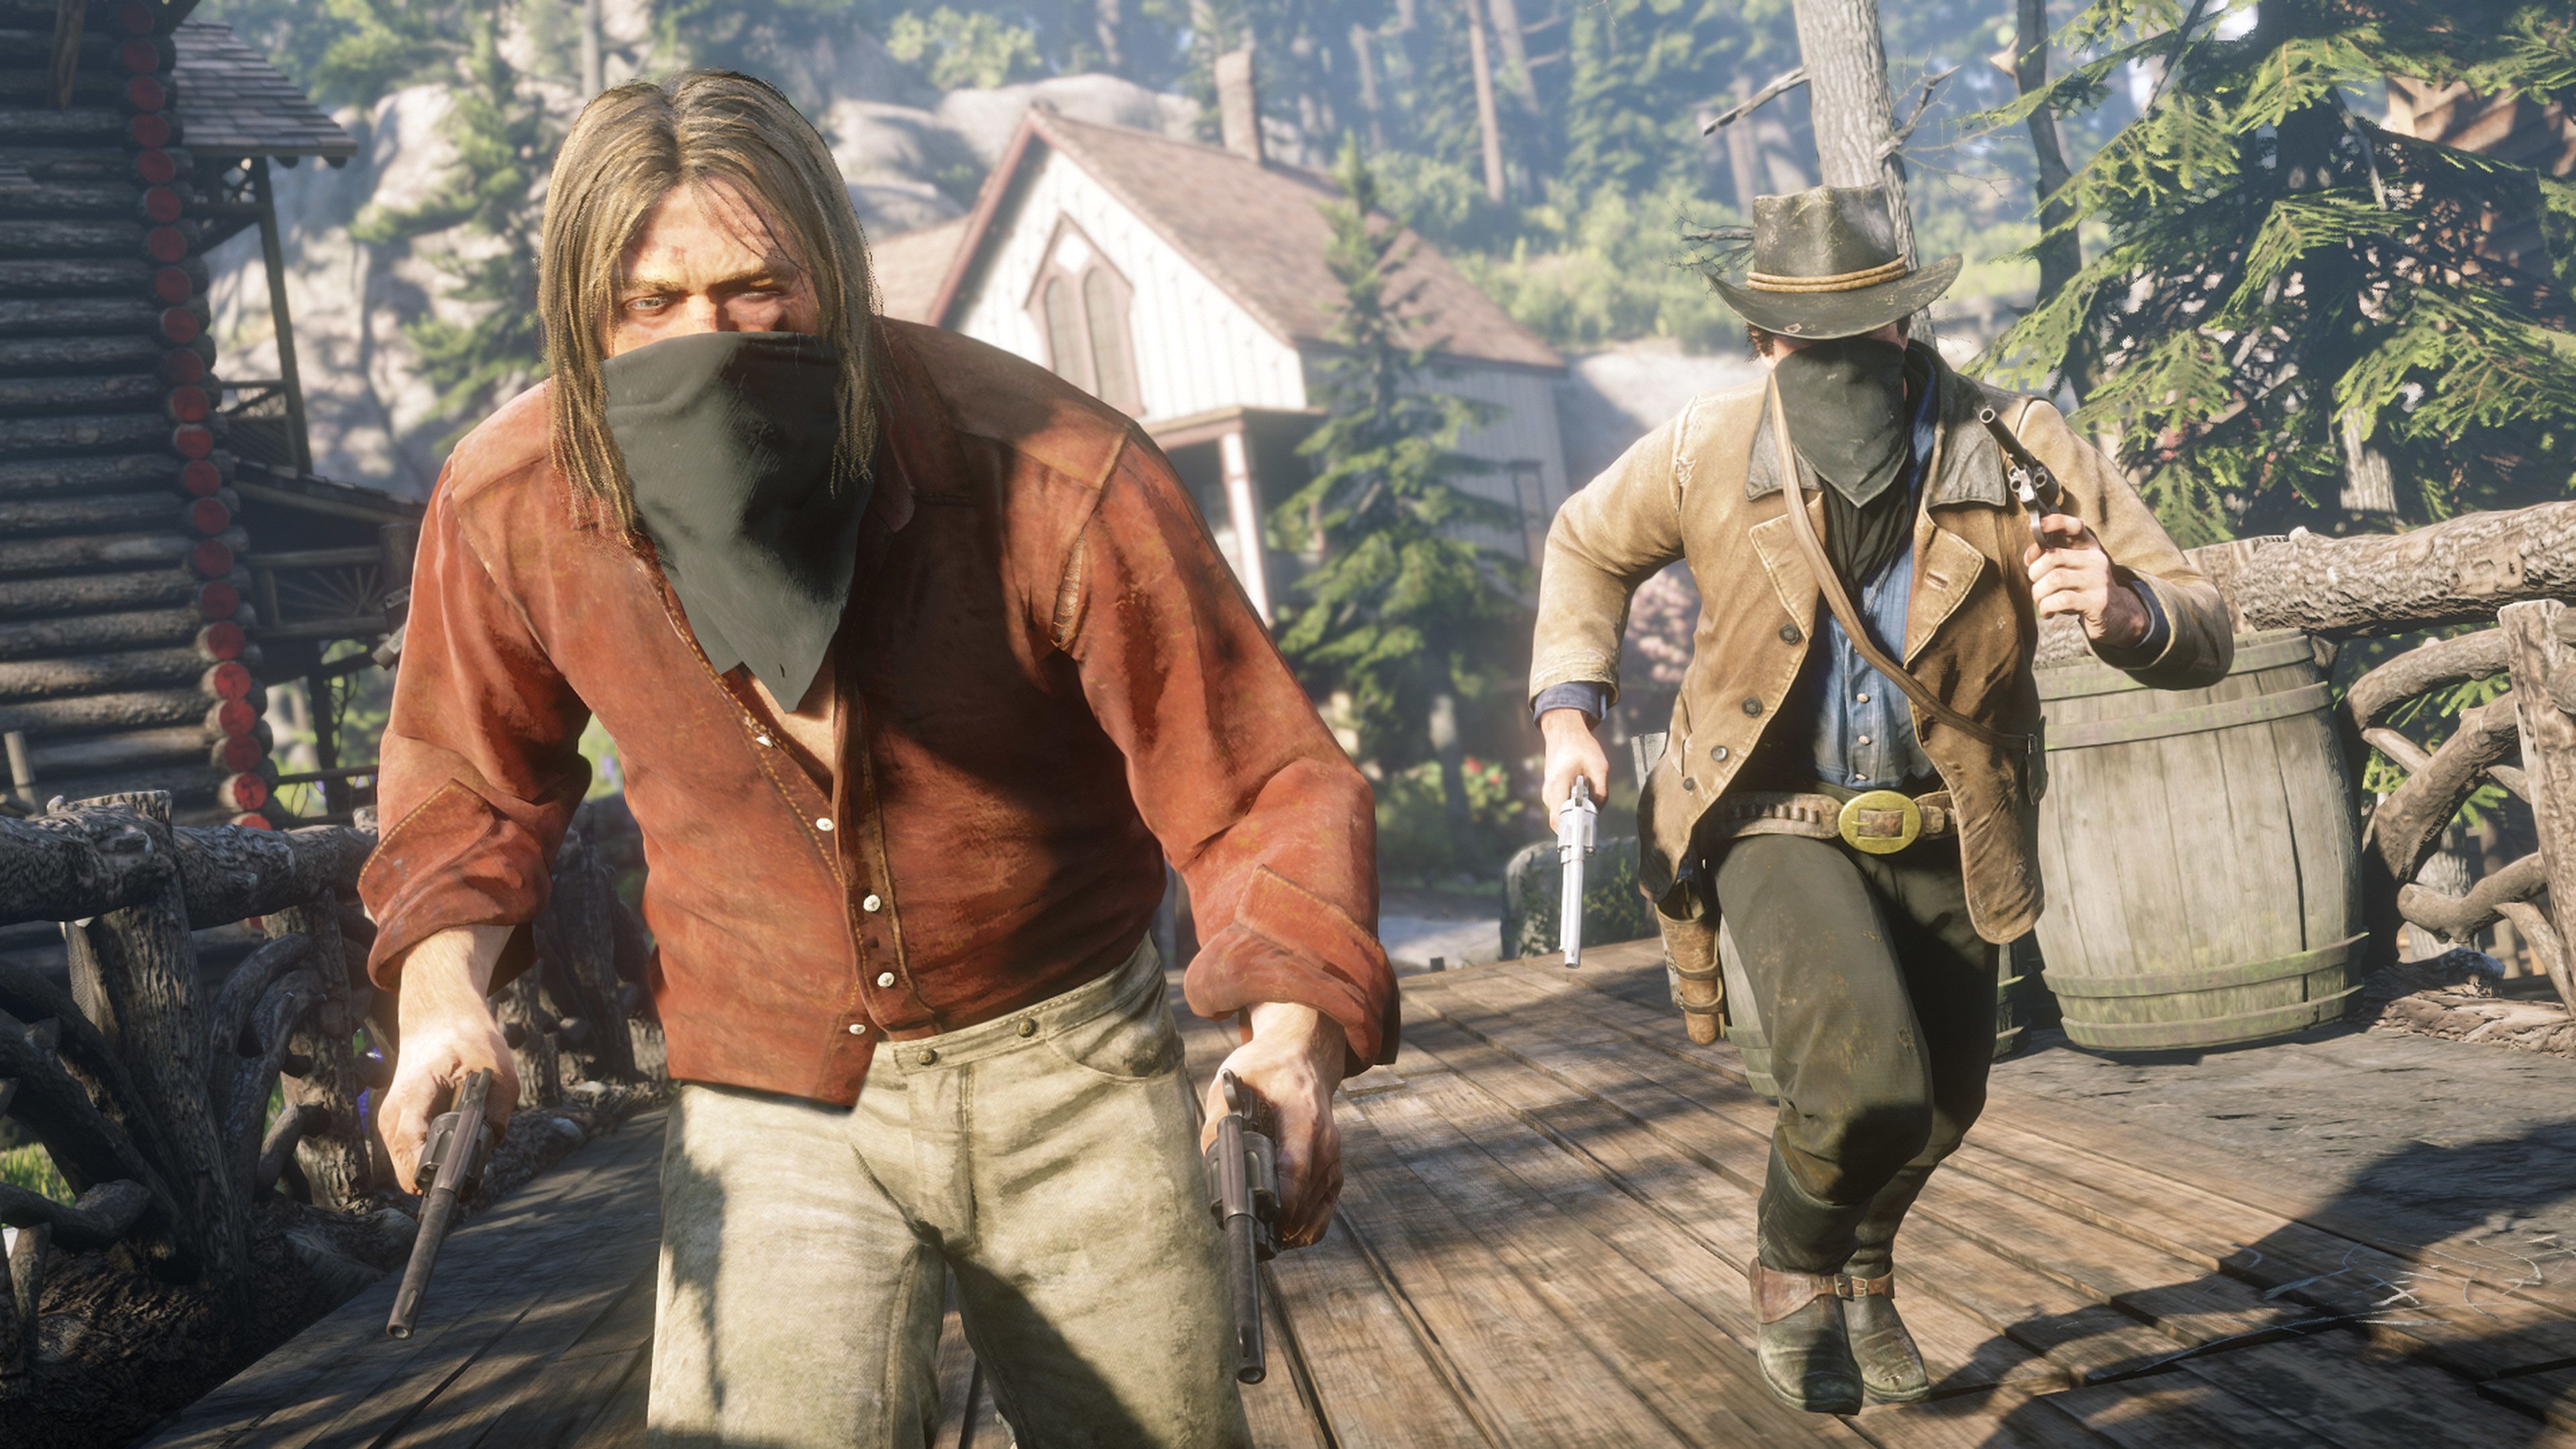 RED DEAD REDEMPTION 2 MICAH BELL AND ARTHUR MORGAN